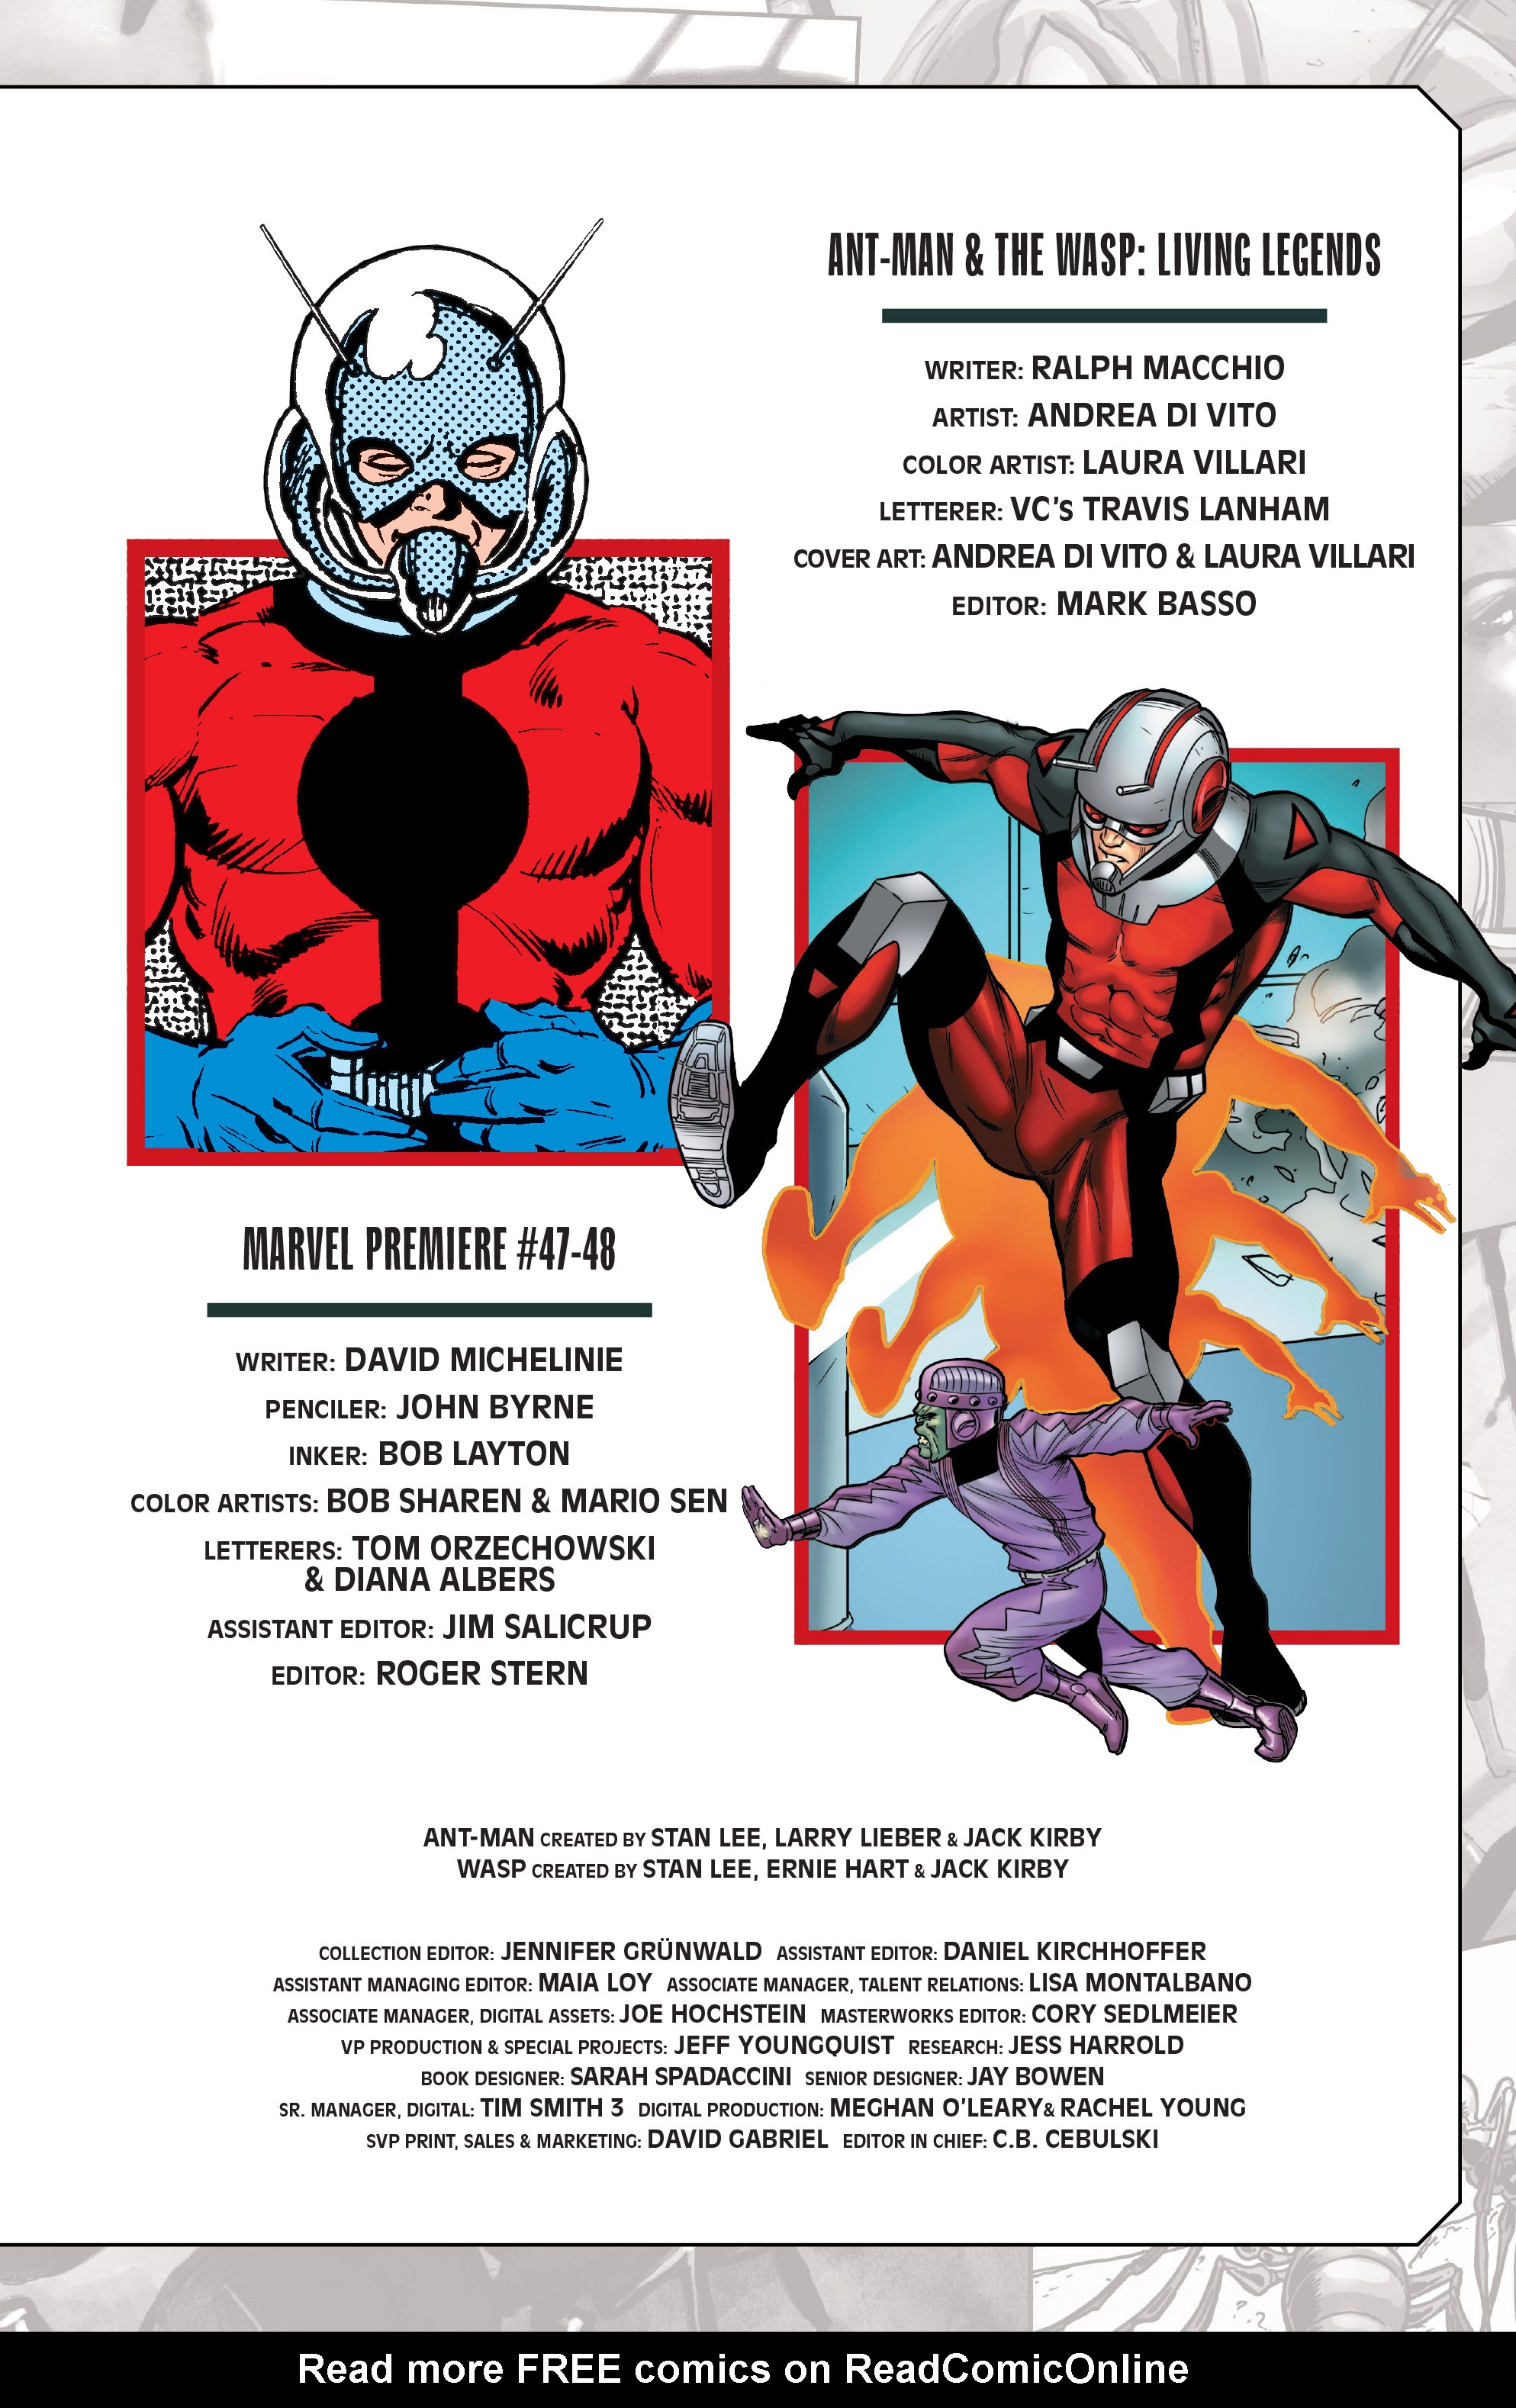 Read online Marvel-Verse: Ant-Man & The Wasp comic -  Issue # TPB - 55